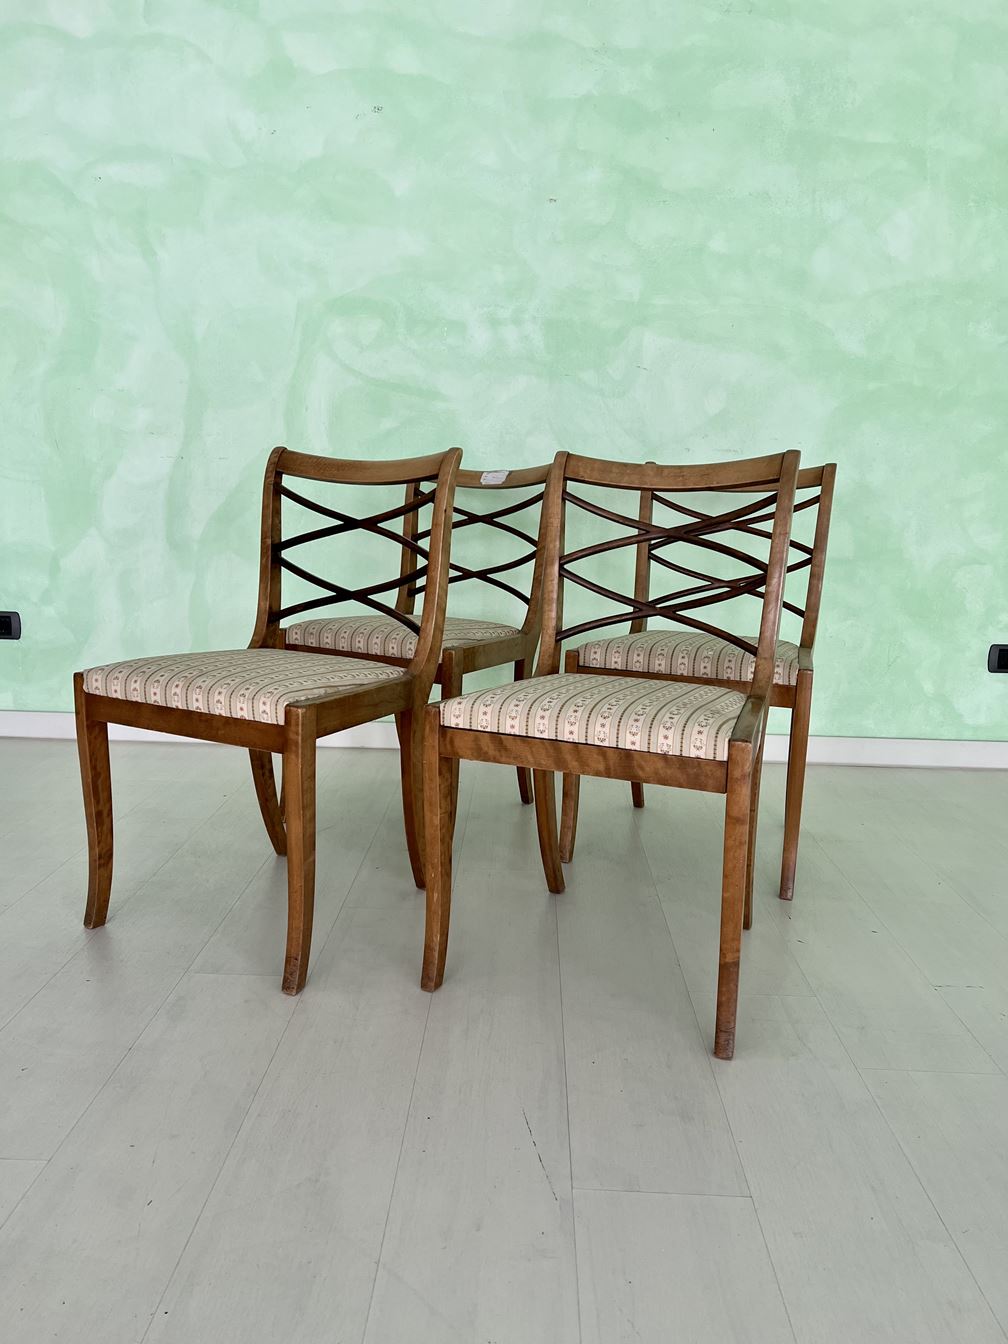 Swedish birch wood chairs from the 1900s